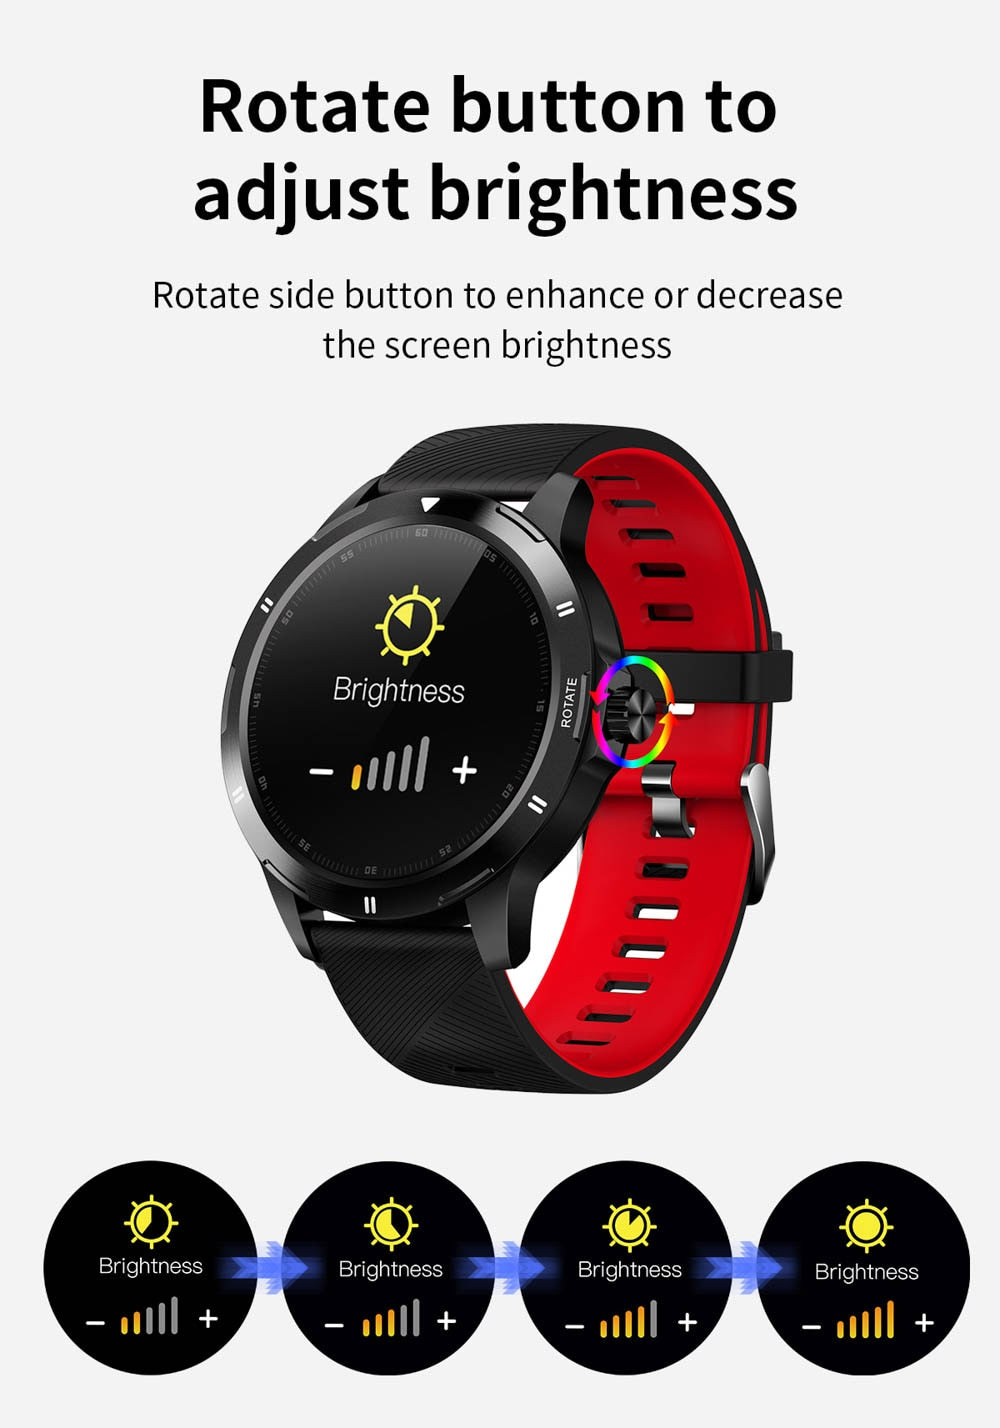 Touch Screen Multi-Dial Smartwatch Thermometer Watch  Full  For Android IOS Phone Multi-Mode Sports Fitness Tracker